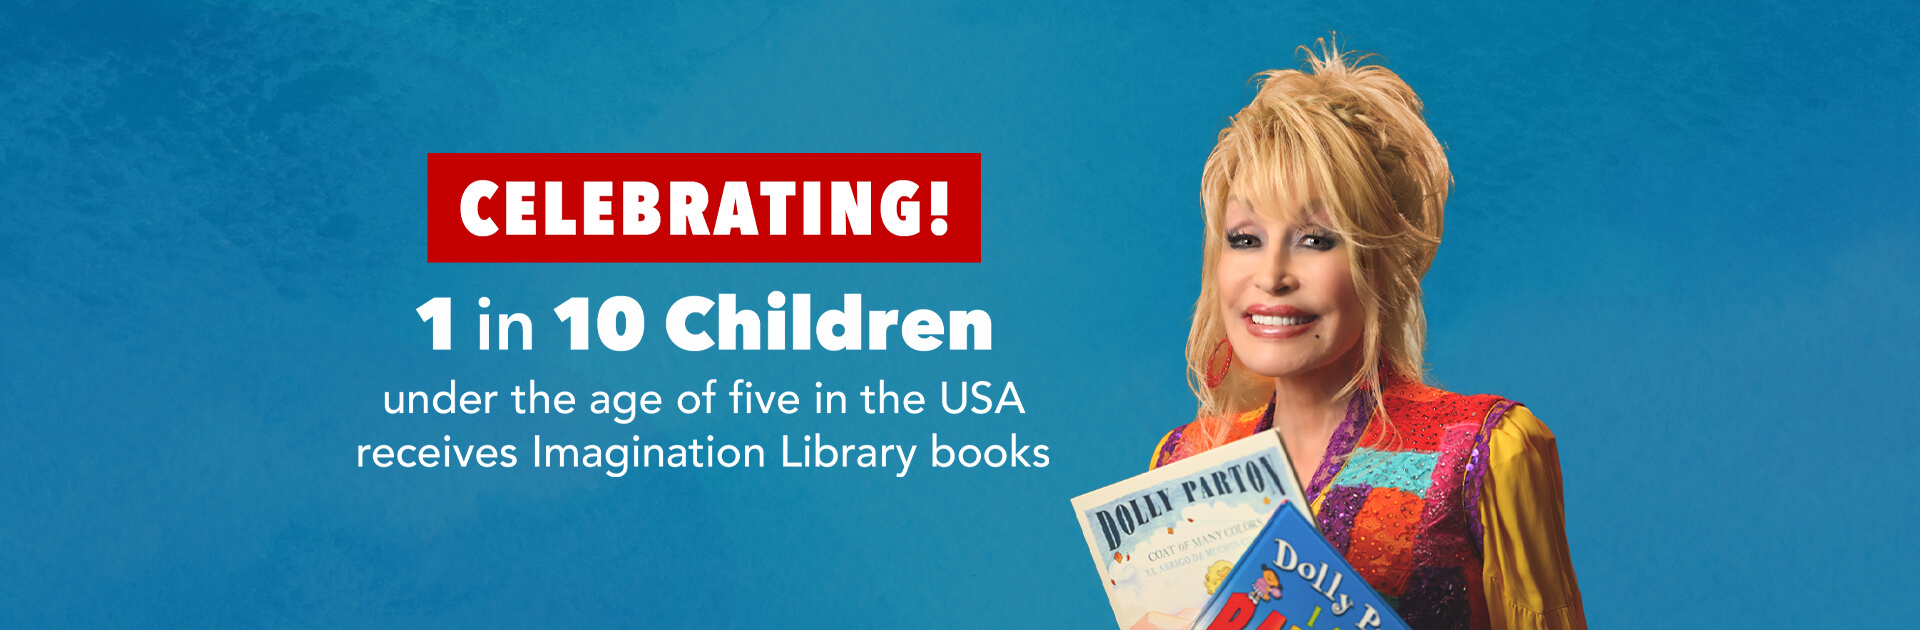 Celebrating 1 in 10 children under the age of 5 in the US receives Imagination Library books!